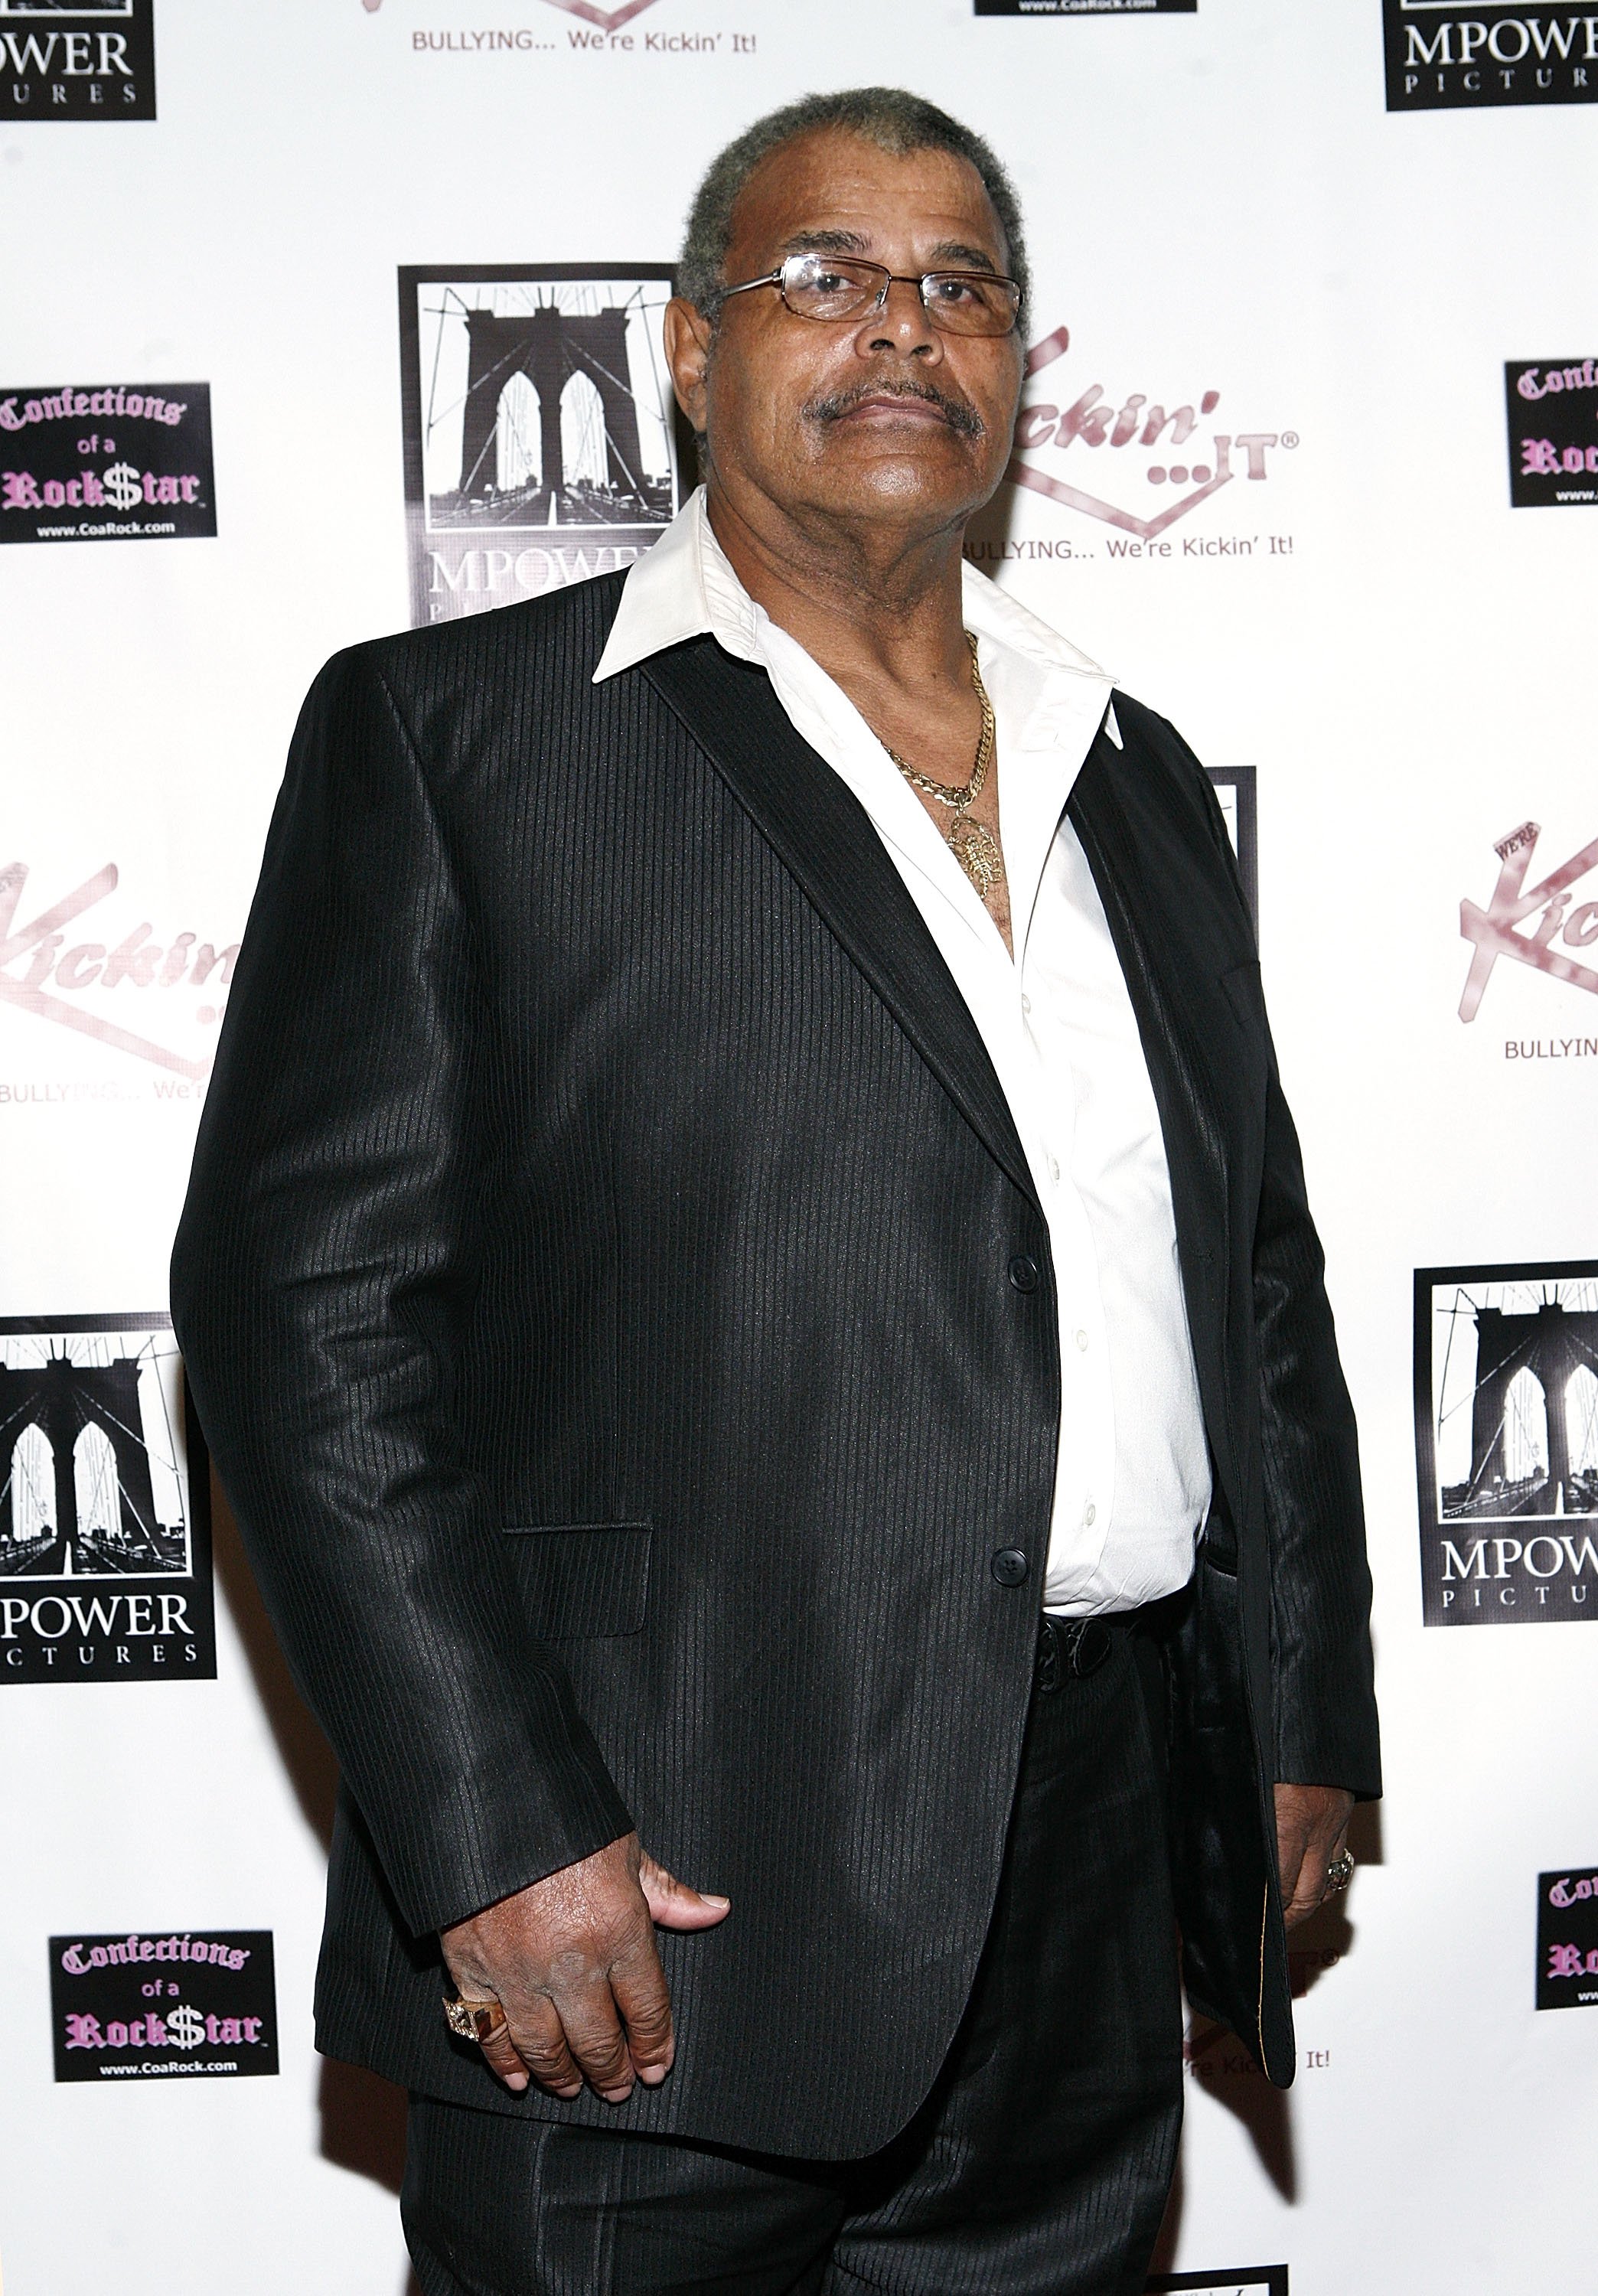  Rocky Johnson attends Unite in the Fight... to Knockout Bullying at the Hard Rock Cafe New York on October 20, 2011|Photo: Getty Images